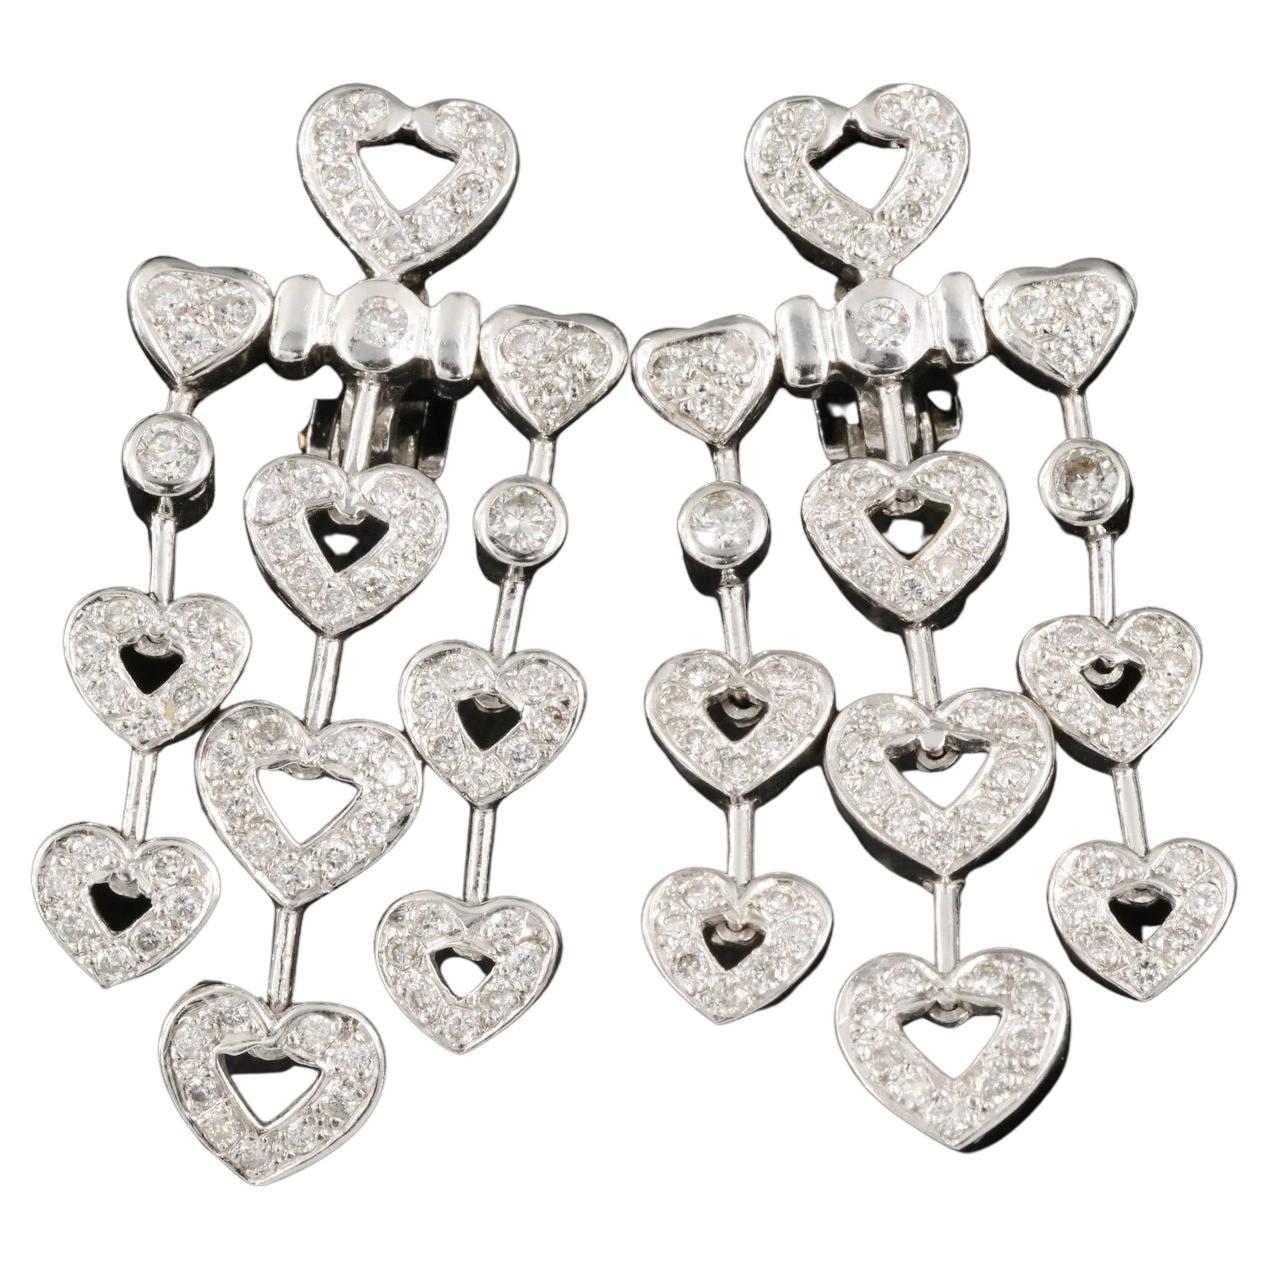 $9500 / New / Italy / 2.65 Ct Diamond Hearts Love Earrings / 18K Gold 24.7 Grams For Sale